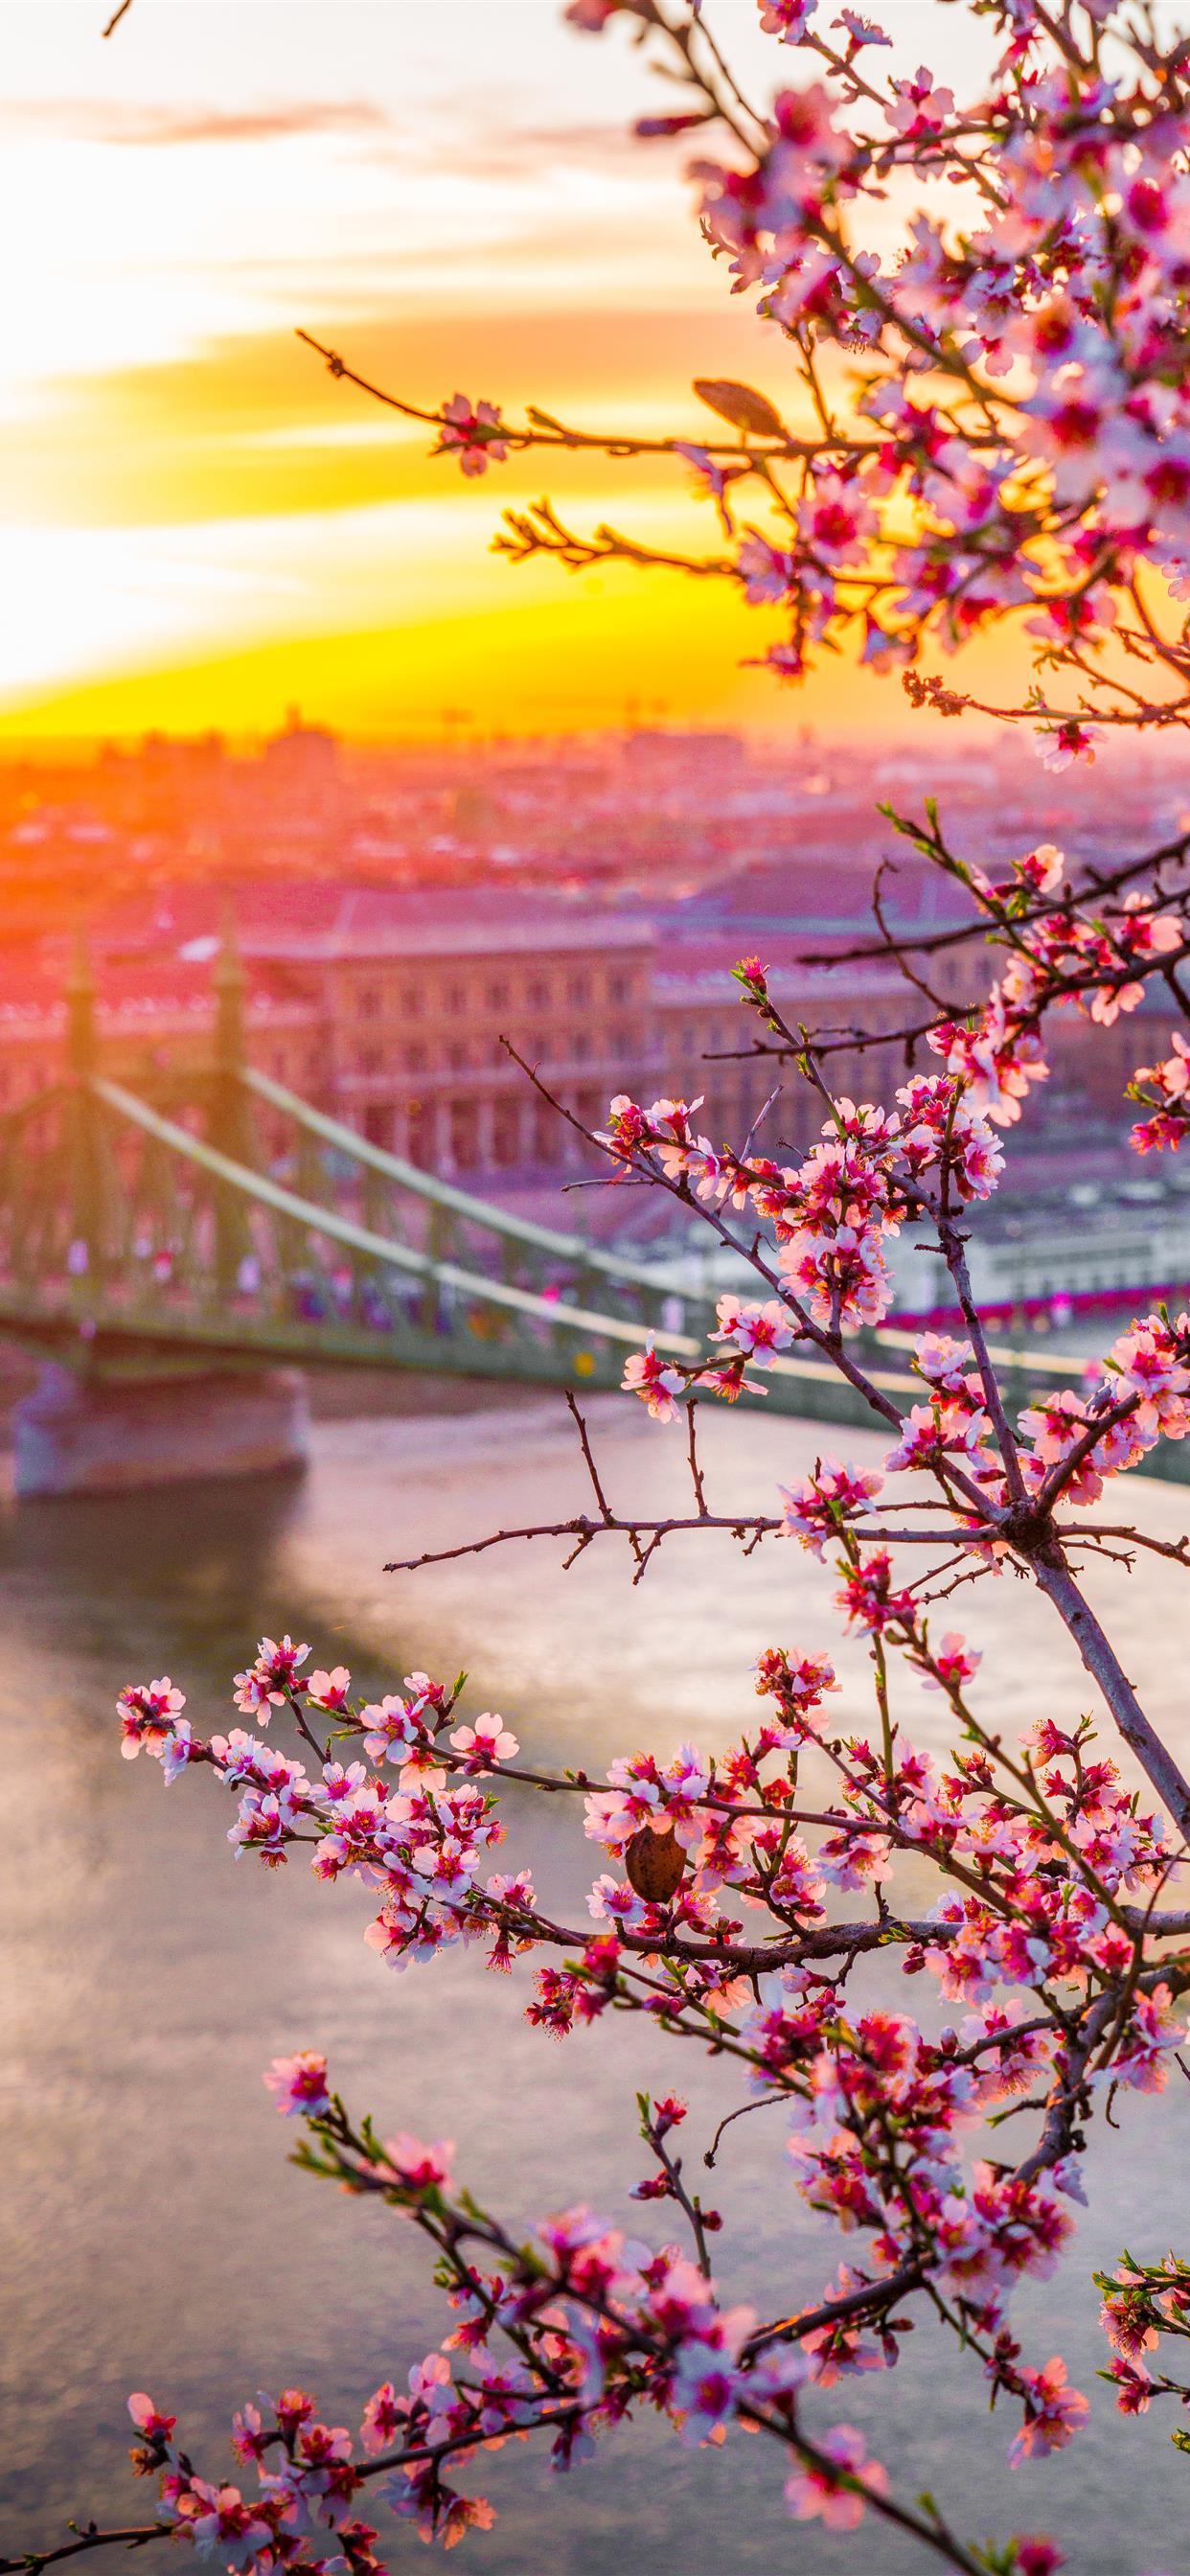 Liberty bridge in Hungary Spring edition iPhone X Wallpaper Free Download